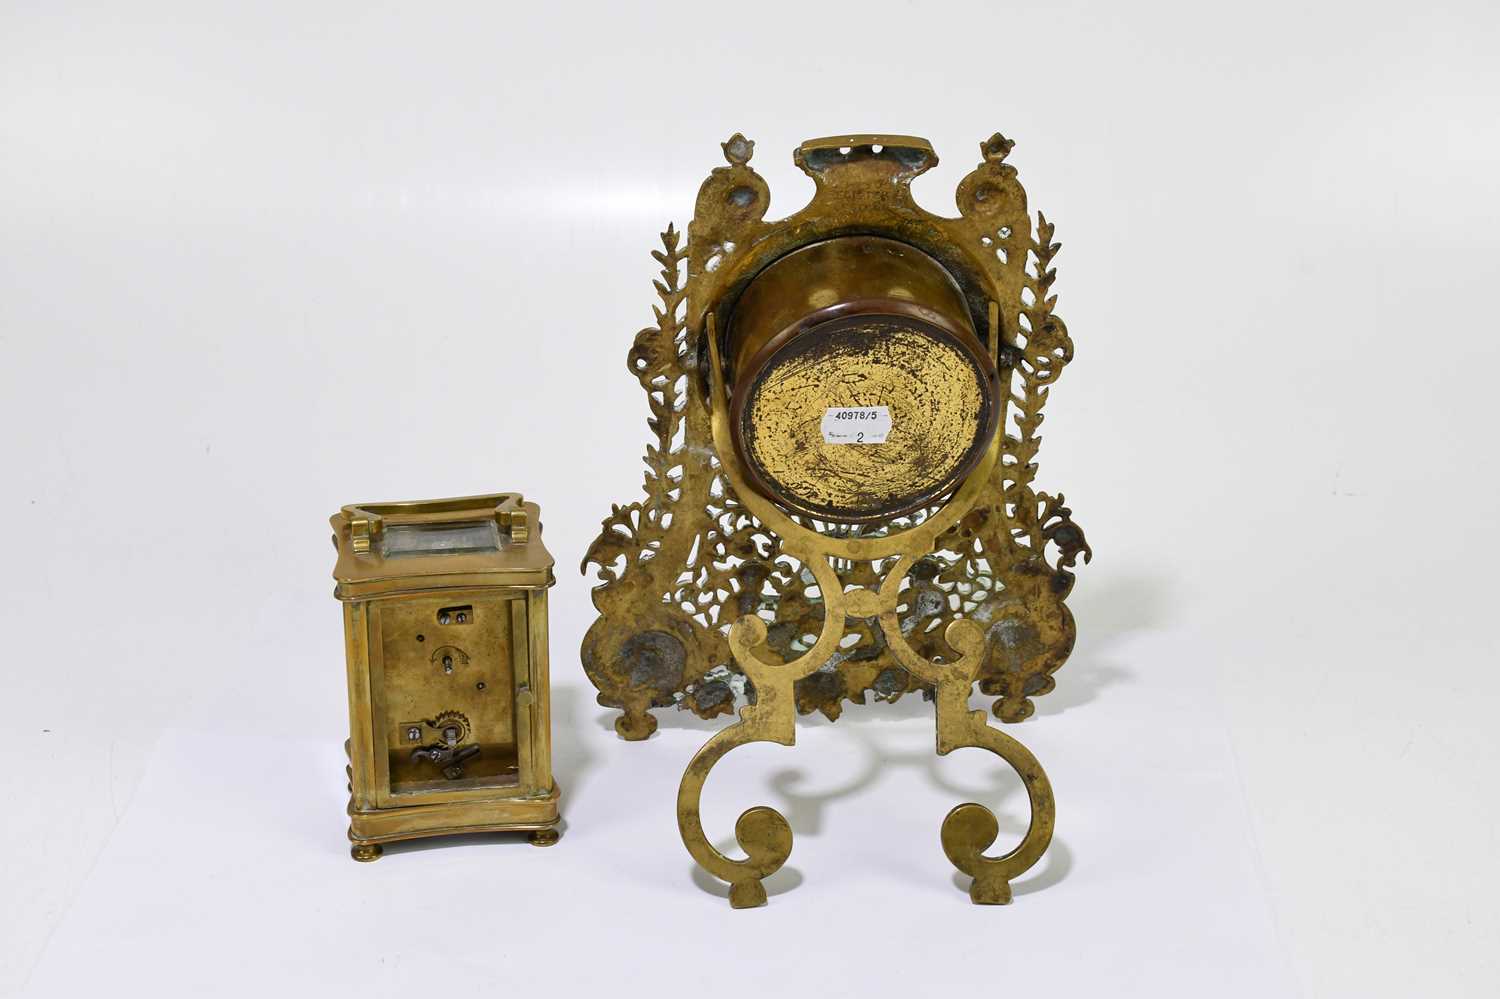 A late 19th /early 20th century brass easel back mantel clock with carved and pierced decoration - Image 2 of 3